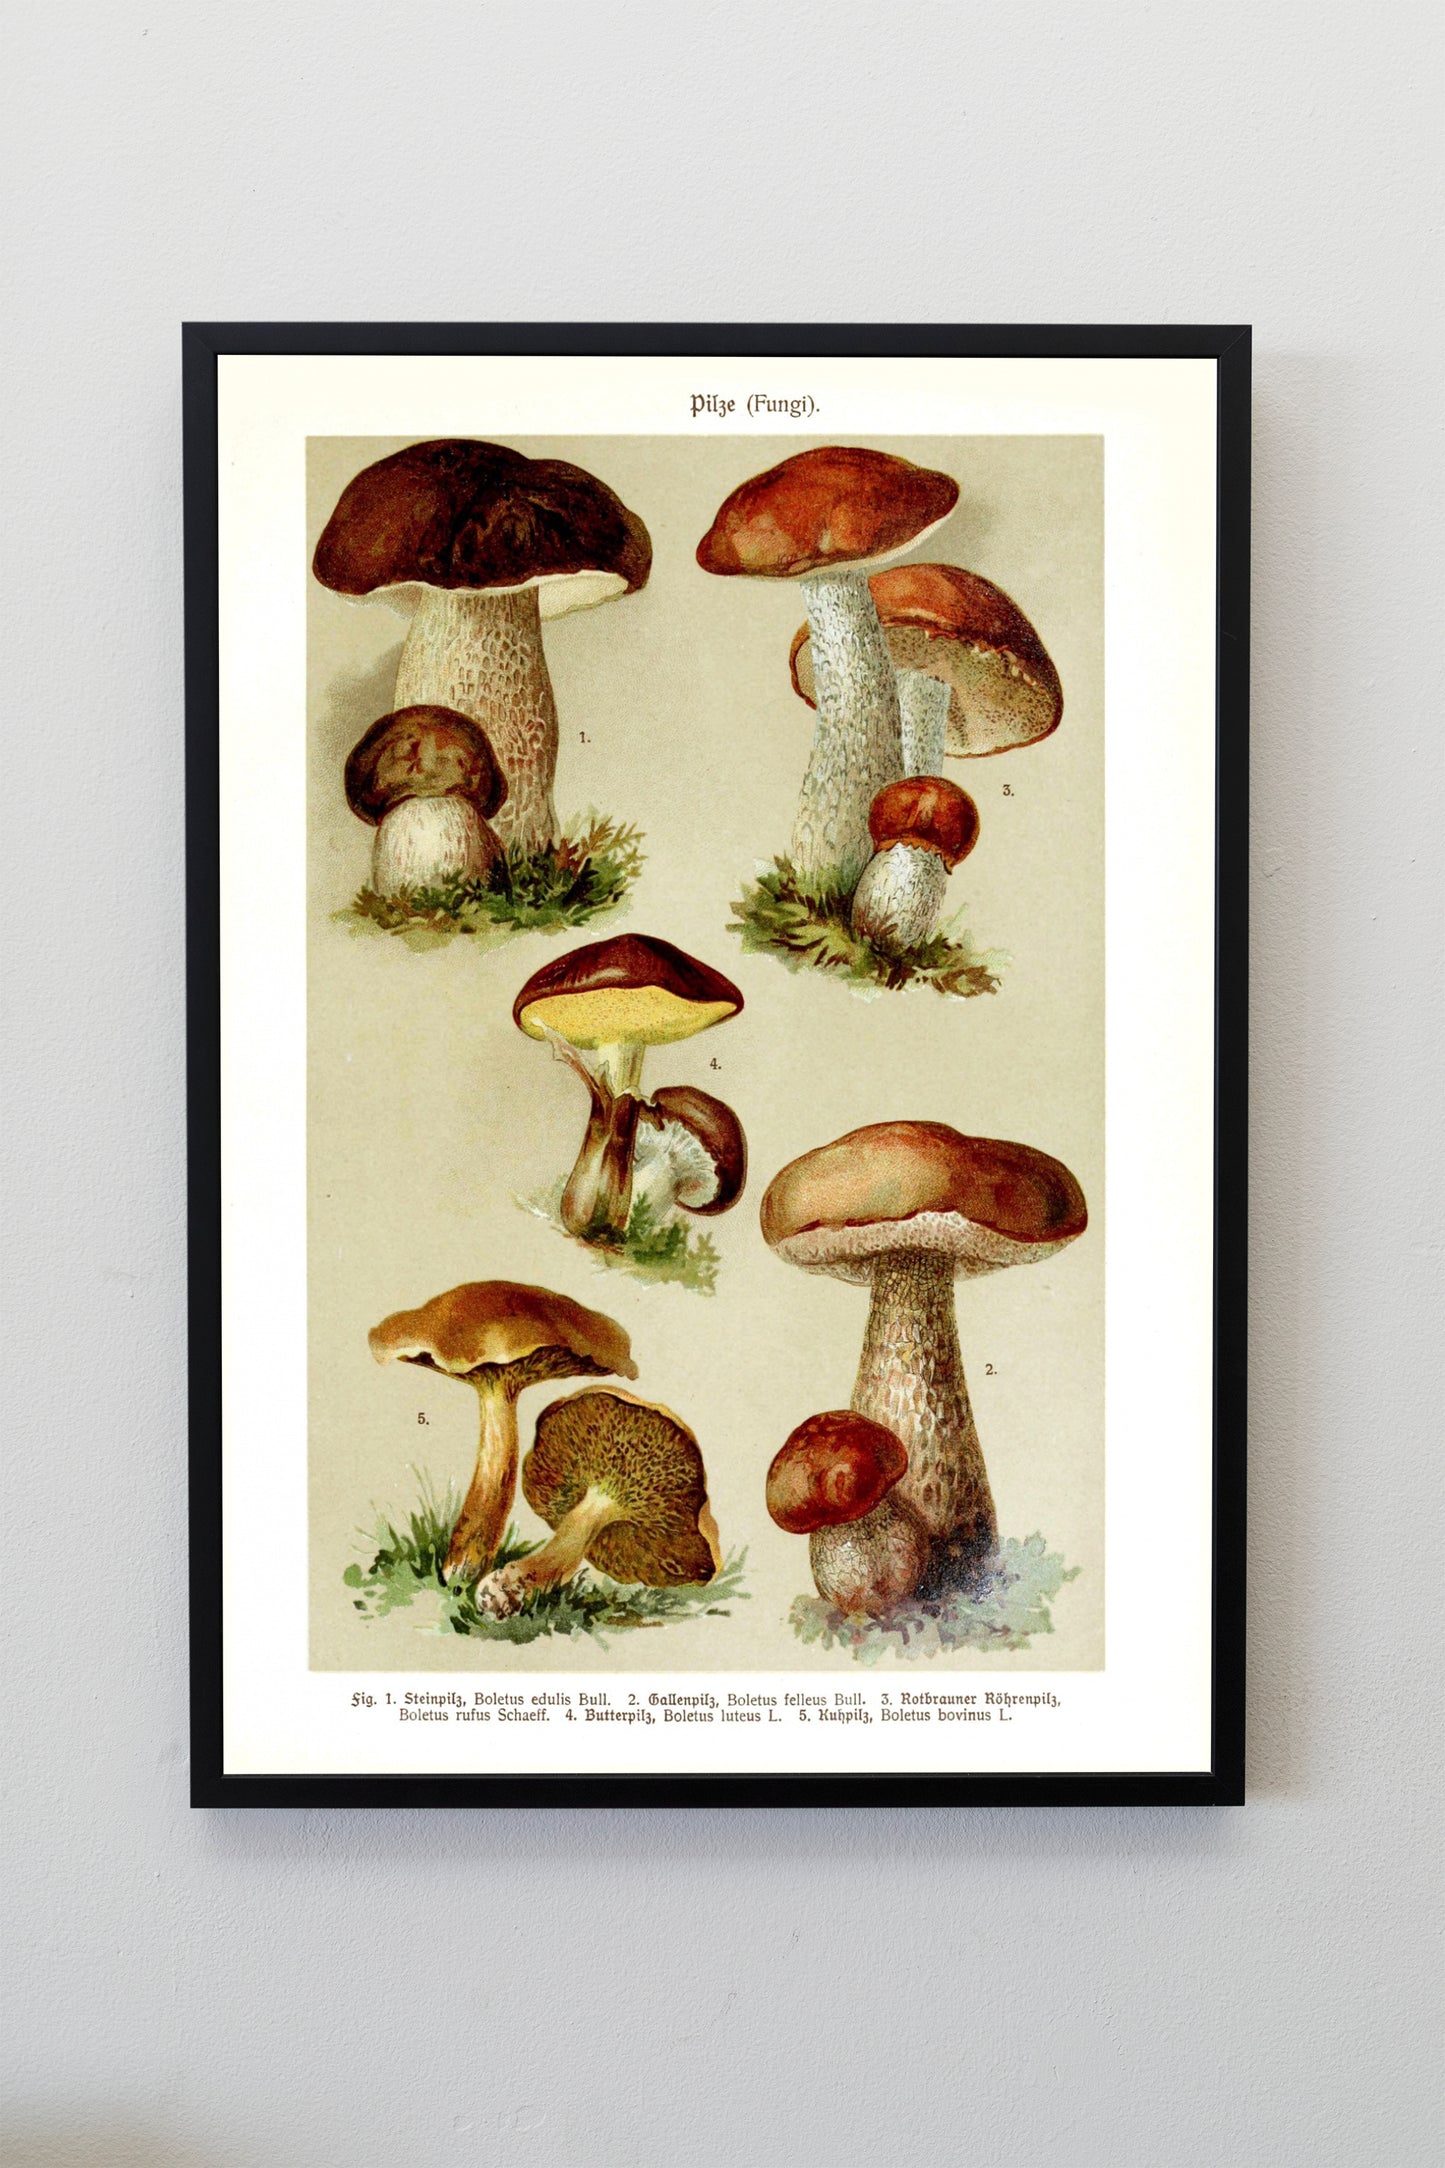 Classic Mushroom Fungi Poster Vintage Art Verticle Wall Hanging Decor A4 A3 A2